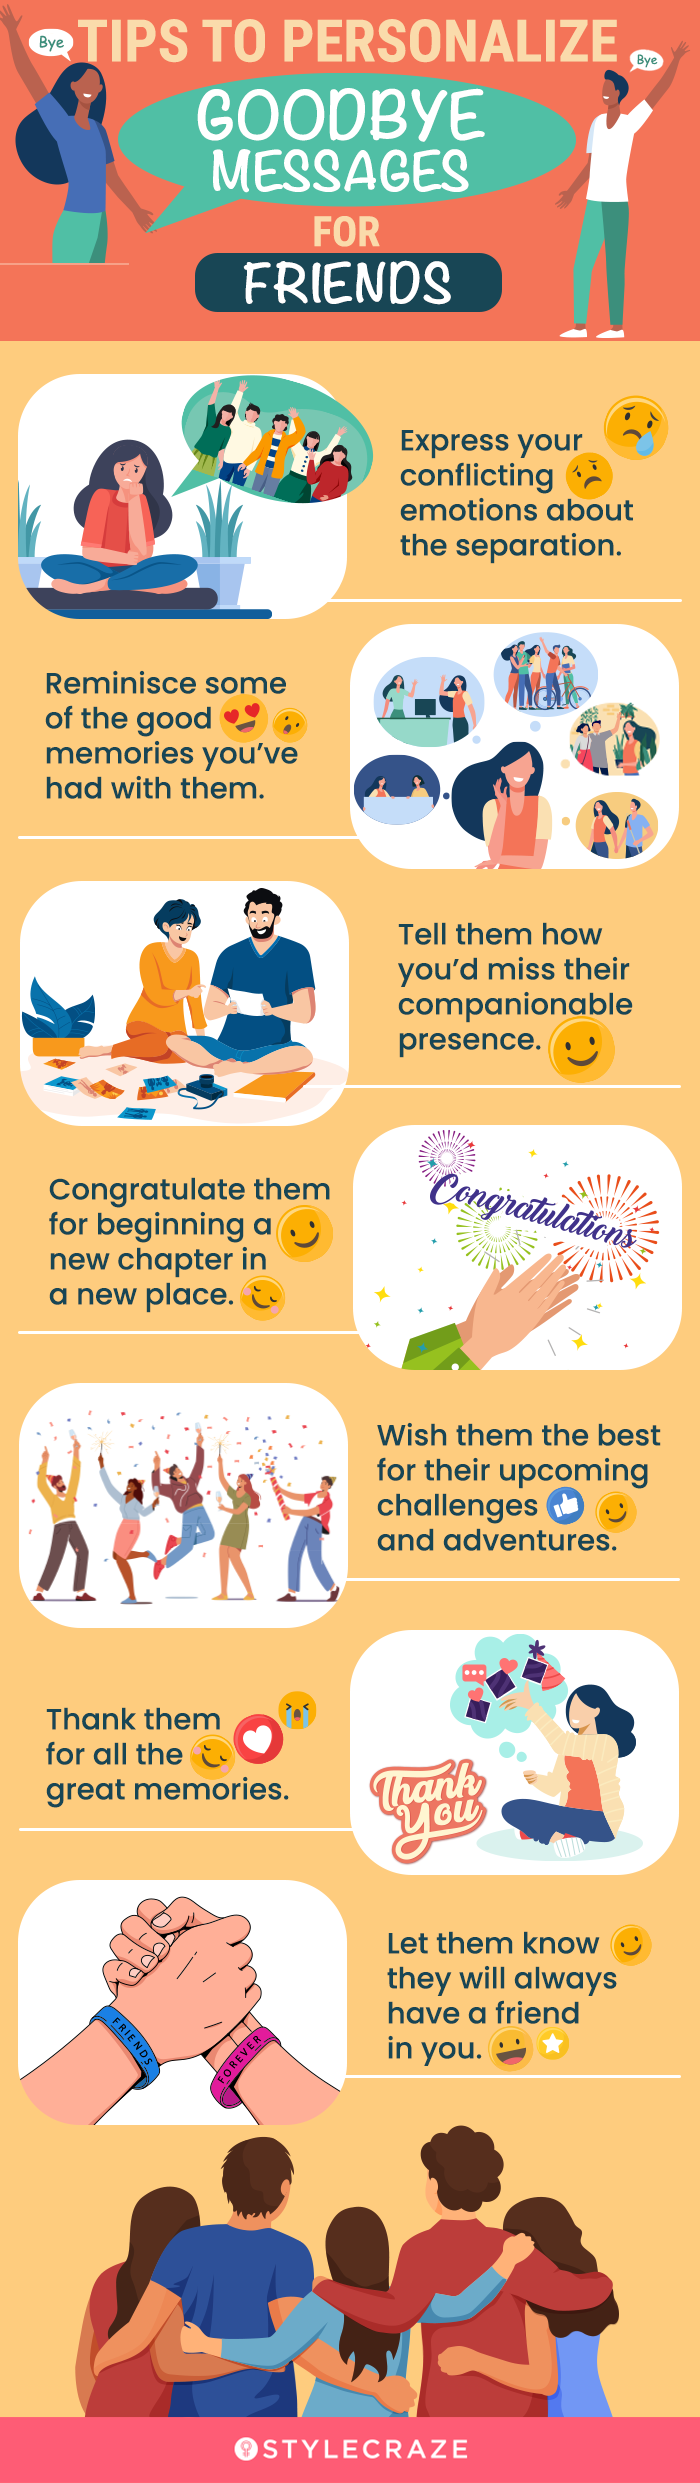 tips to personalize goodbye messages for friends (infographic)